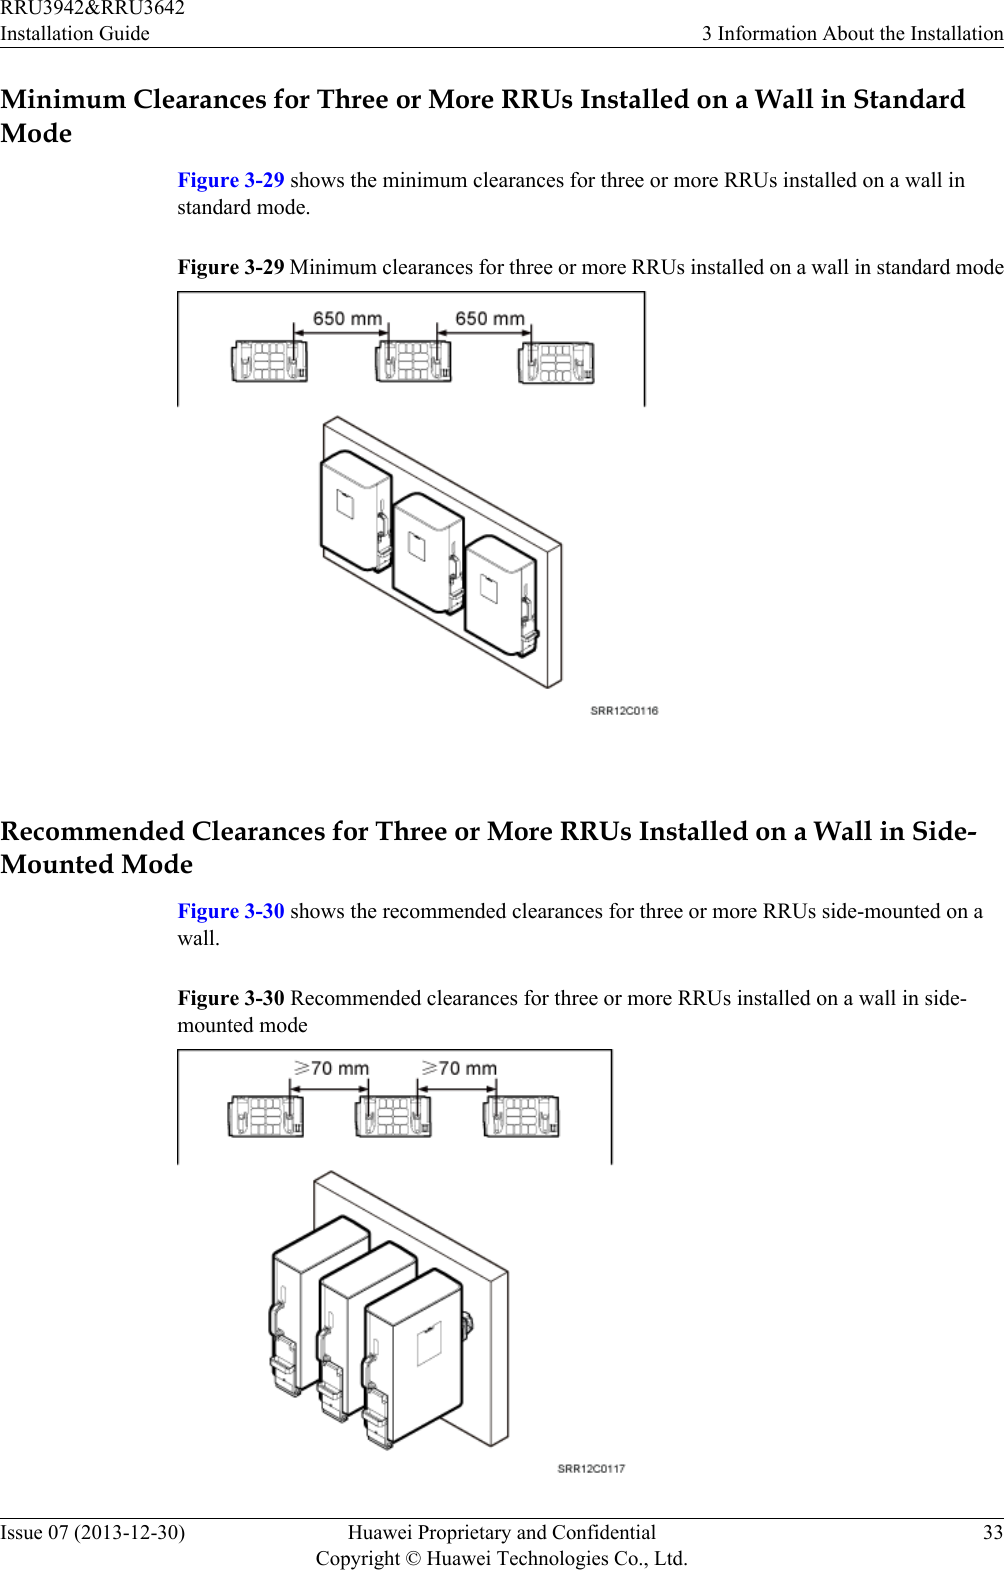 Minimum Clearances for Three or More RRUs Installed on a Wall in StandardModeFigure 3-29 shows the minimum clearances for three or more RRUs installed on a wall instandard mode.Figure 3-29 Minimum clearances for three or more RRUs installed on a wall in standard mode Recommended Clearances for Three or More RRUs Installed on a Wall in Side-Mounted ModeFigure 3-30 shows the recommended clearances for three or more RRUs side-mounted on awall.Figure 3-30 Recommended clearances for three or more RRUs installed on a wall in side-mounted modeRRU3942&amp;RRU3642Installation Guide 3 Information About the InstallationIssue 07 (2013-12-30) Huawei Proprietary and ConfidentialCopyright © Huawei Technologies Co., Ltd.33